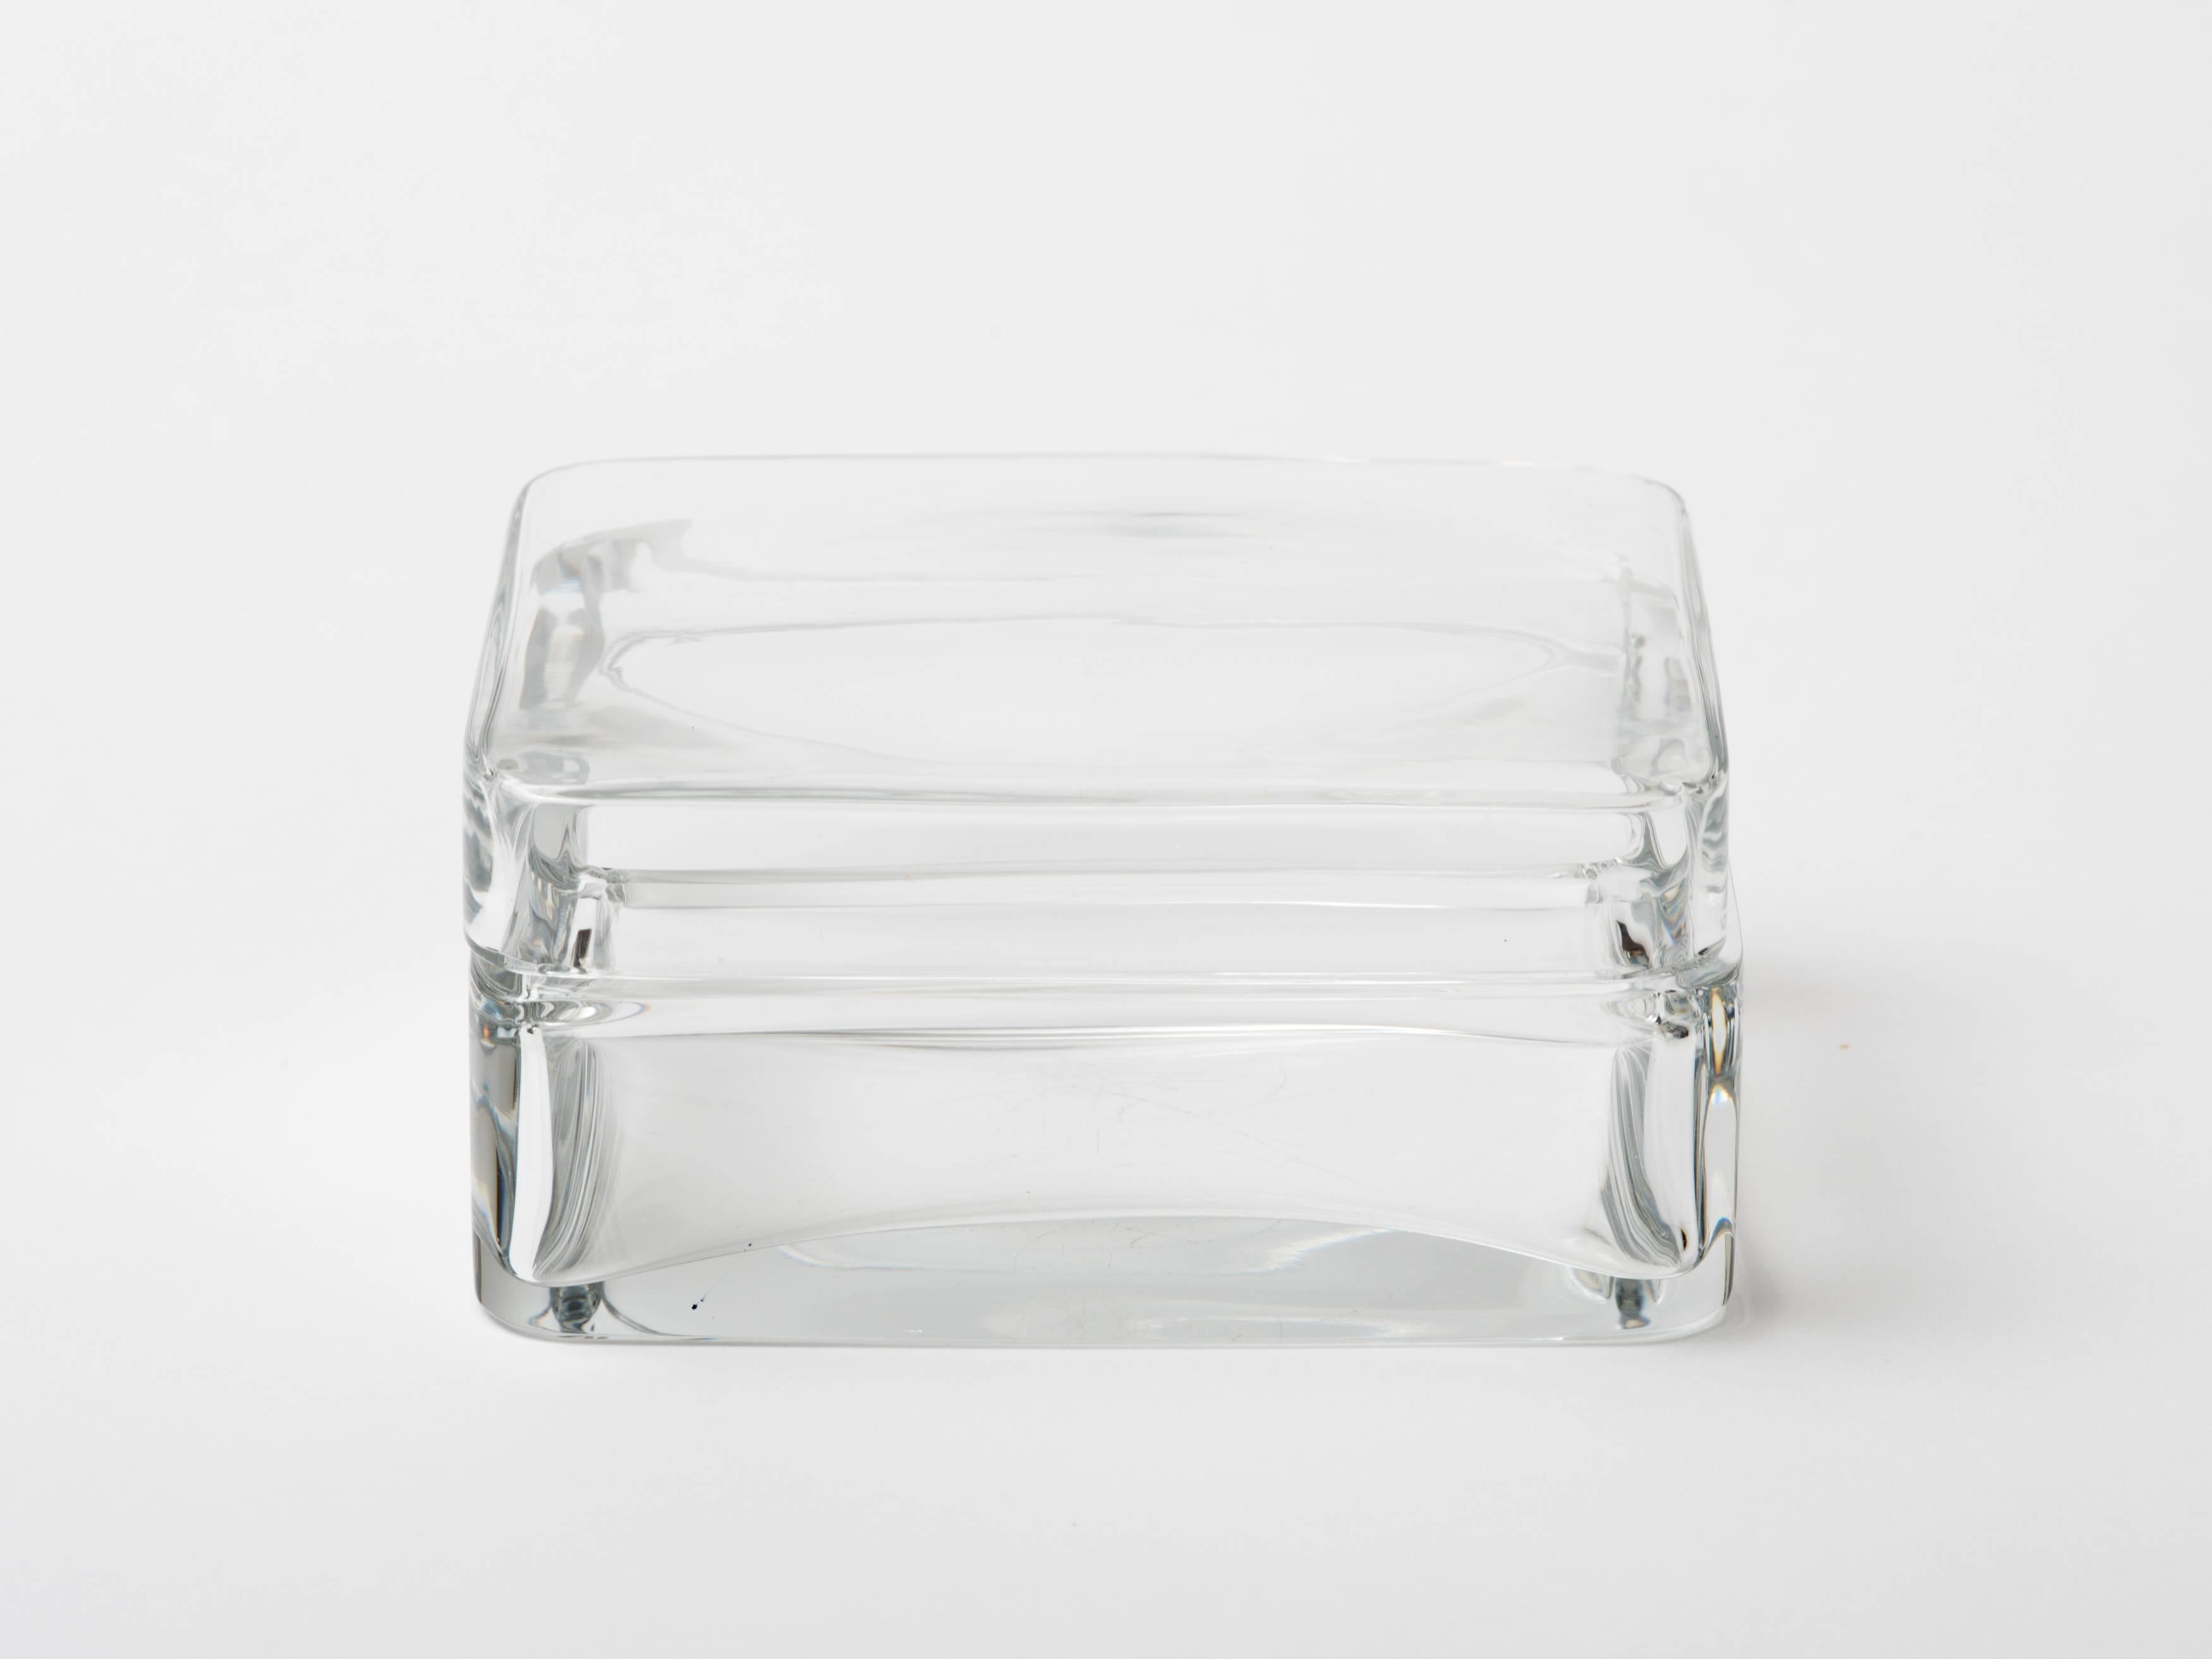 Baccarat crystal jewelry box with lid and rounded edges, France, circa 1970s.